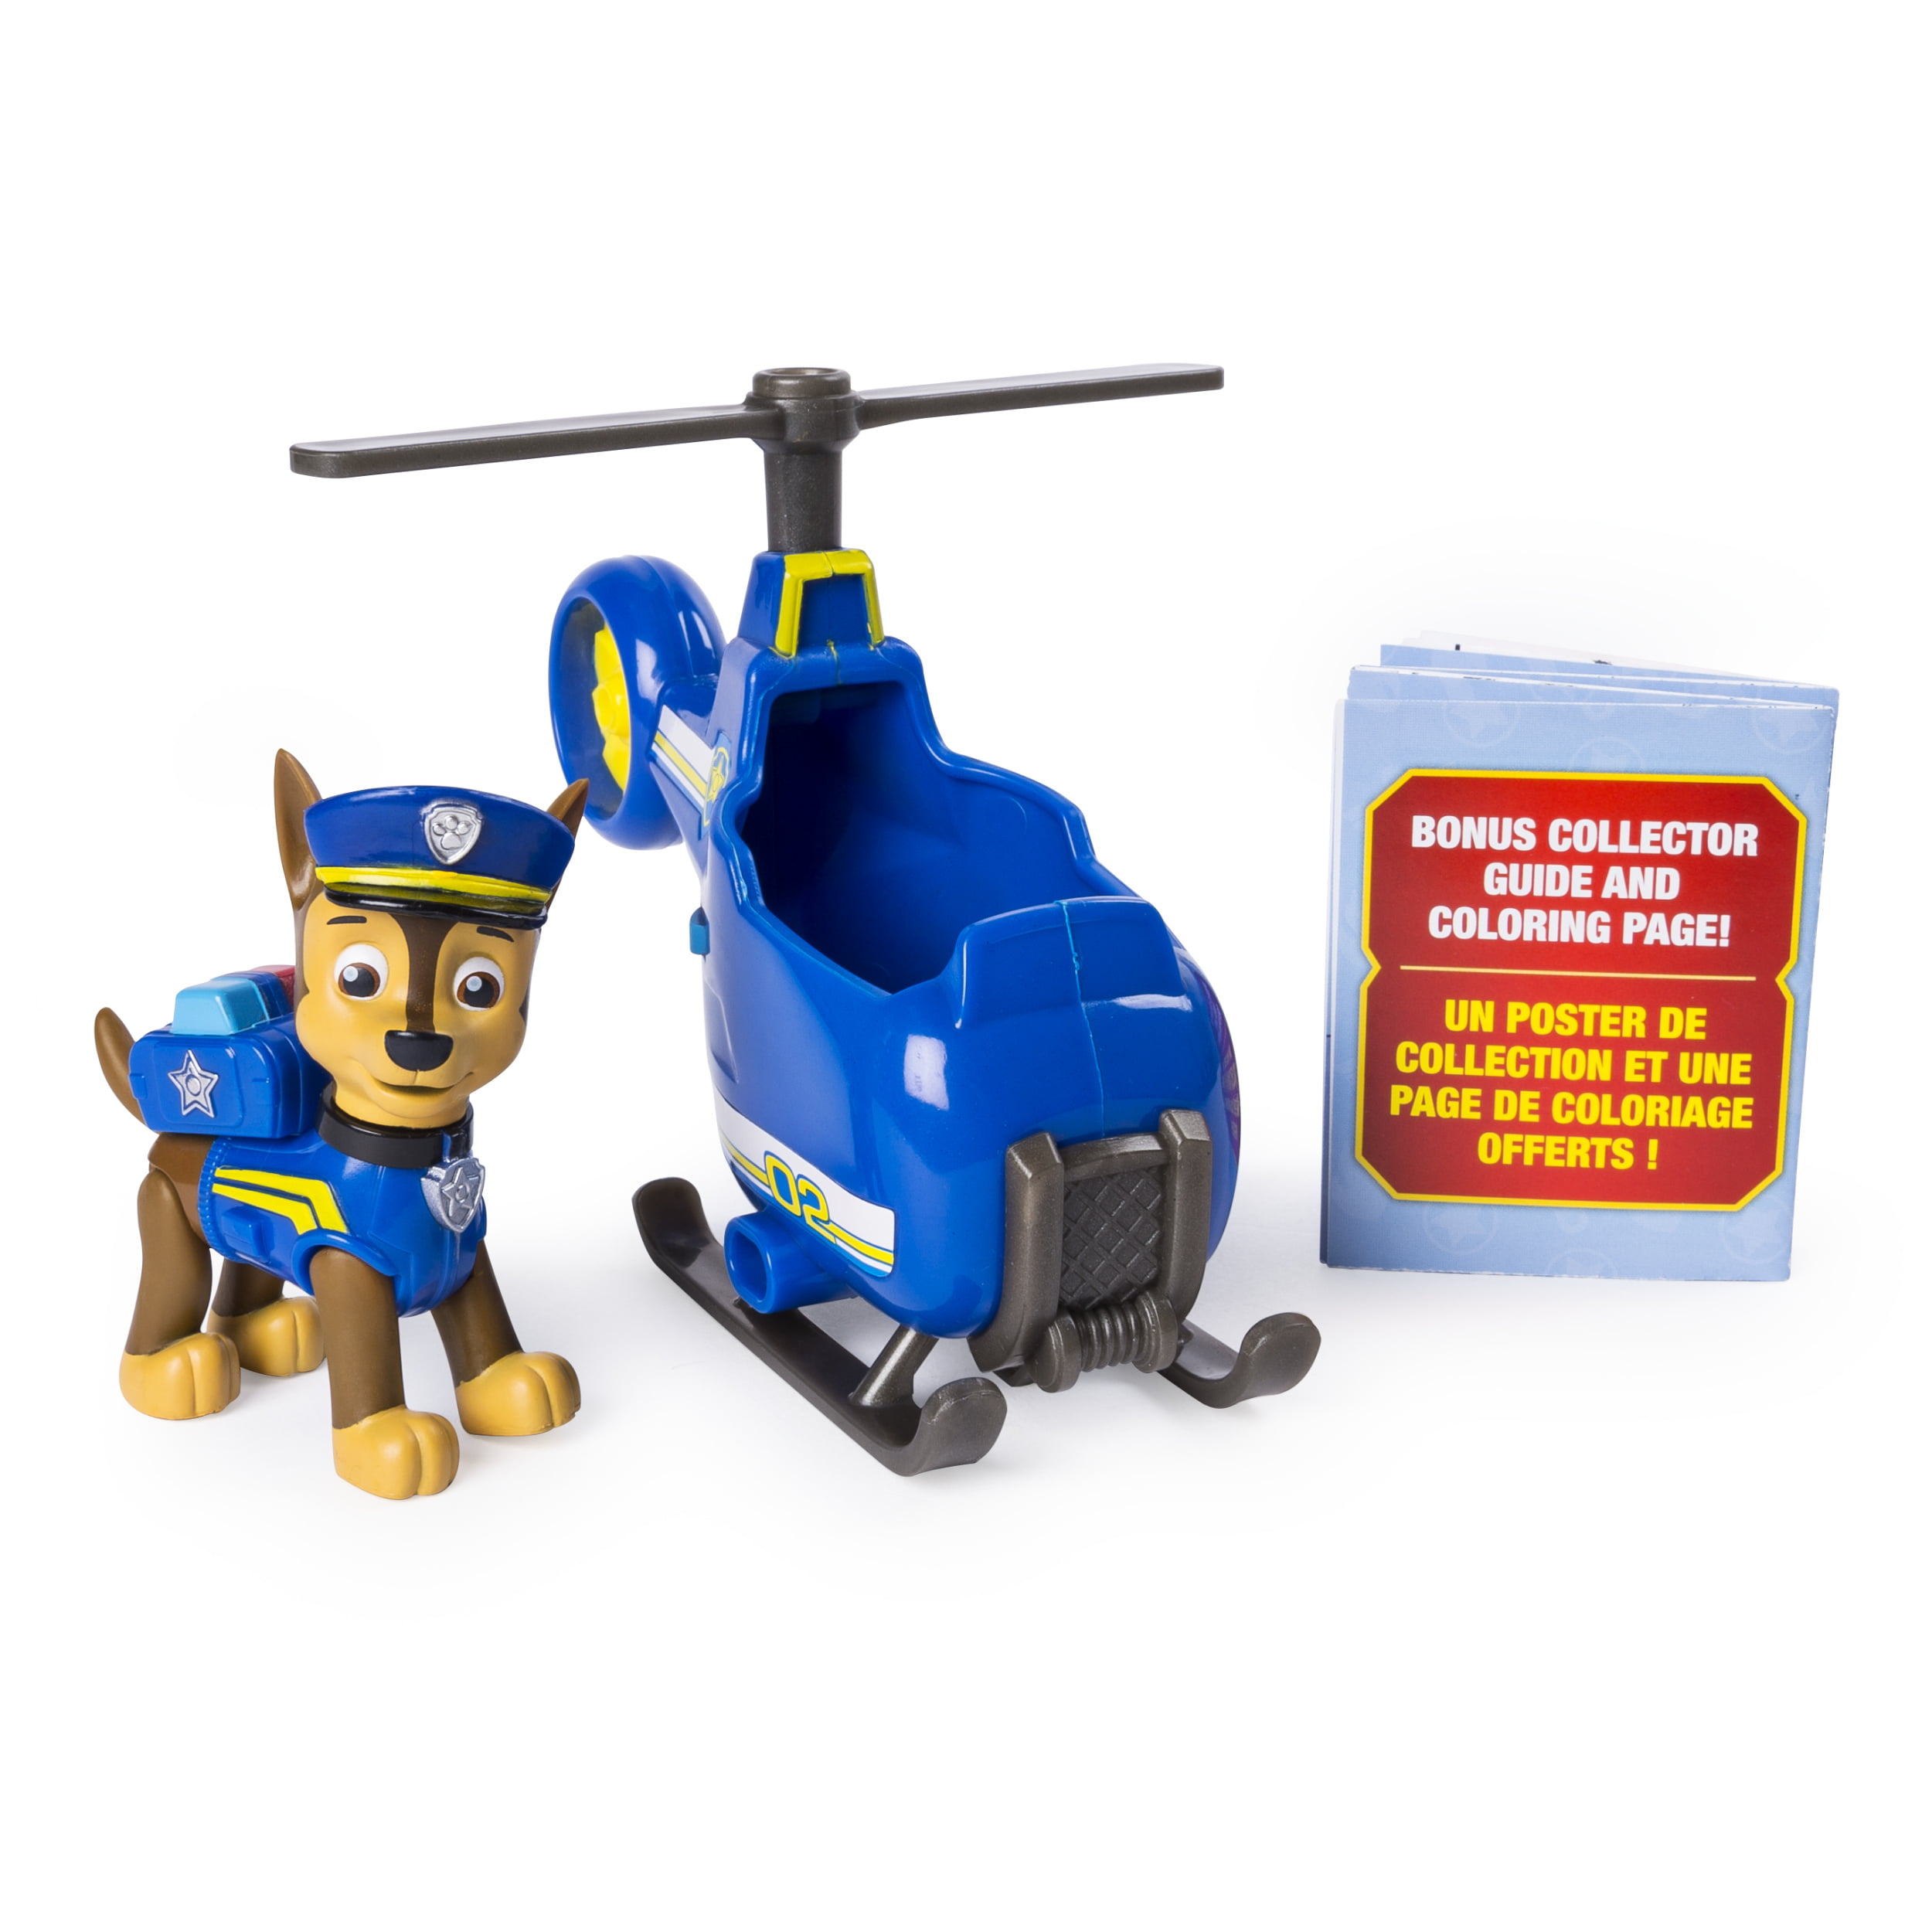 PAW Patrol Rescue, Chase's Mini Helicopter with Collectible Figure for Ages 3 and Up